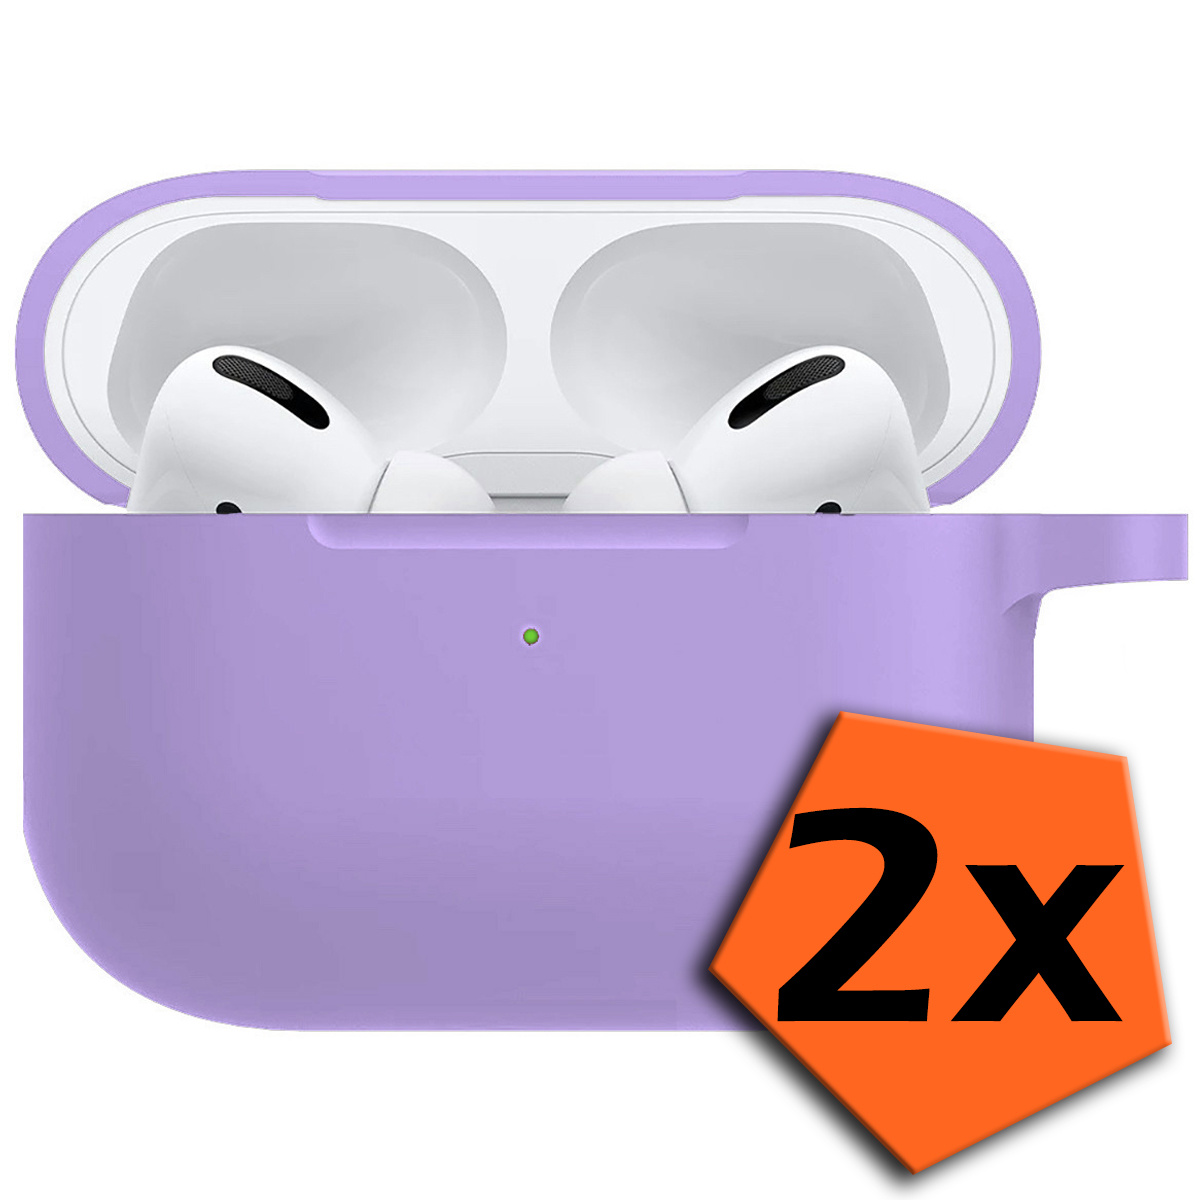 Nomfy Hoes Geschikt voor AirPods Pro Hoesje Siliconen Case - Hoesje Geschikt voor AirPods Pro Case Hoes - Lila - 2 PACK